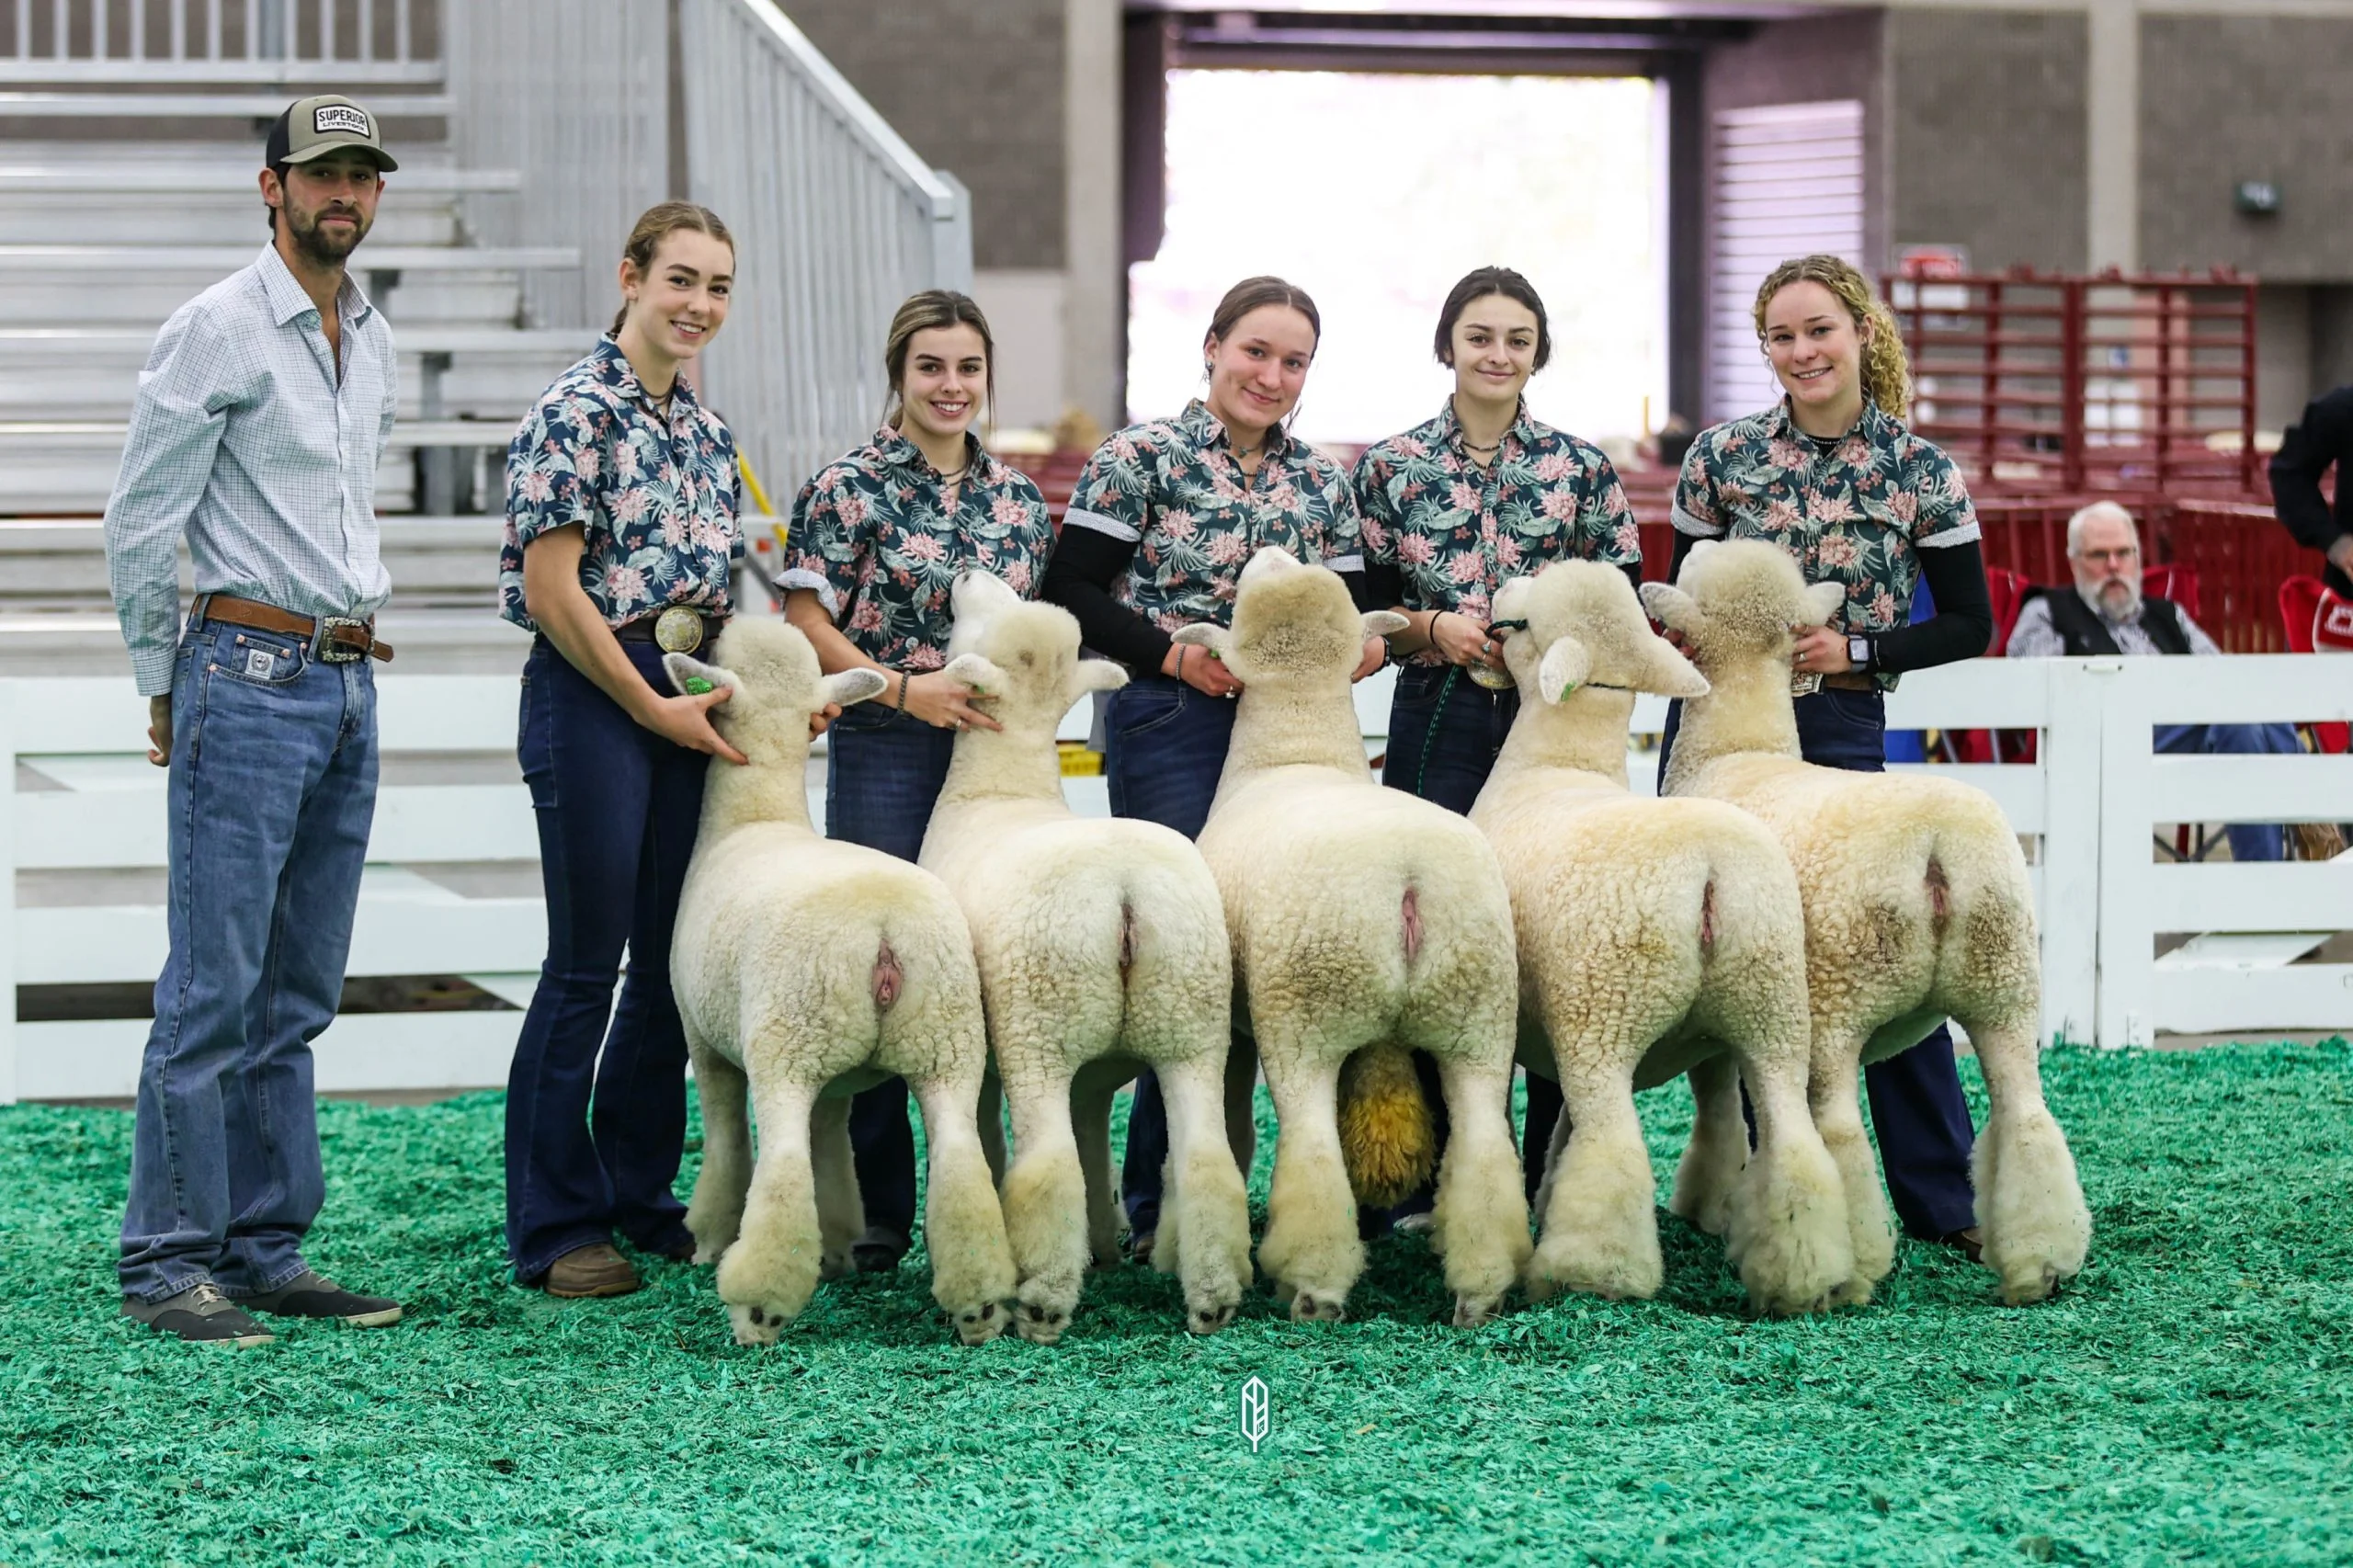 2023 National White Romney Show at NAILE
1st place white flock exhibited by Catherine Hromis of Winding Wicks Farm